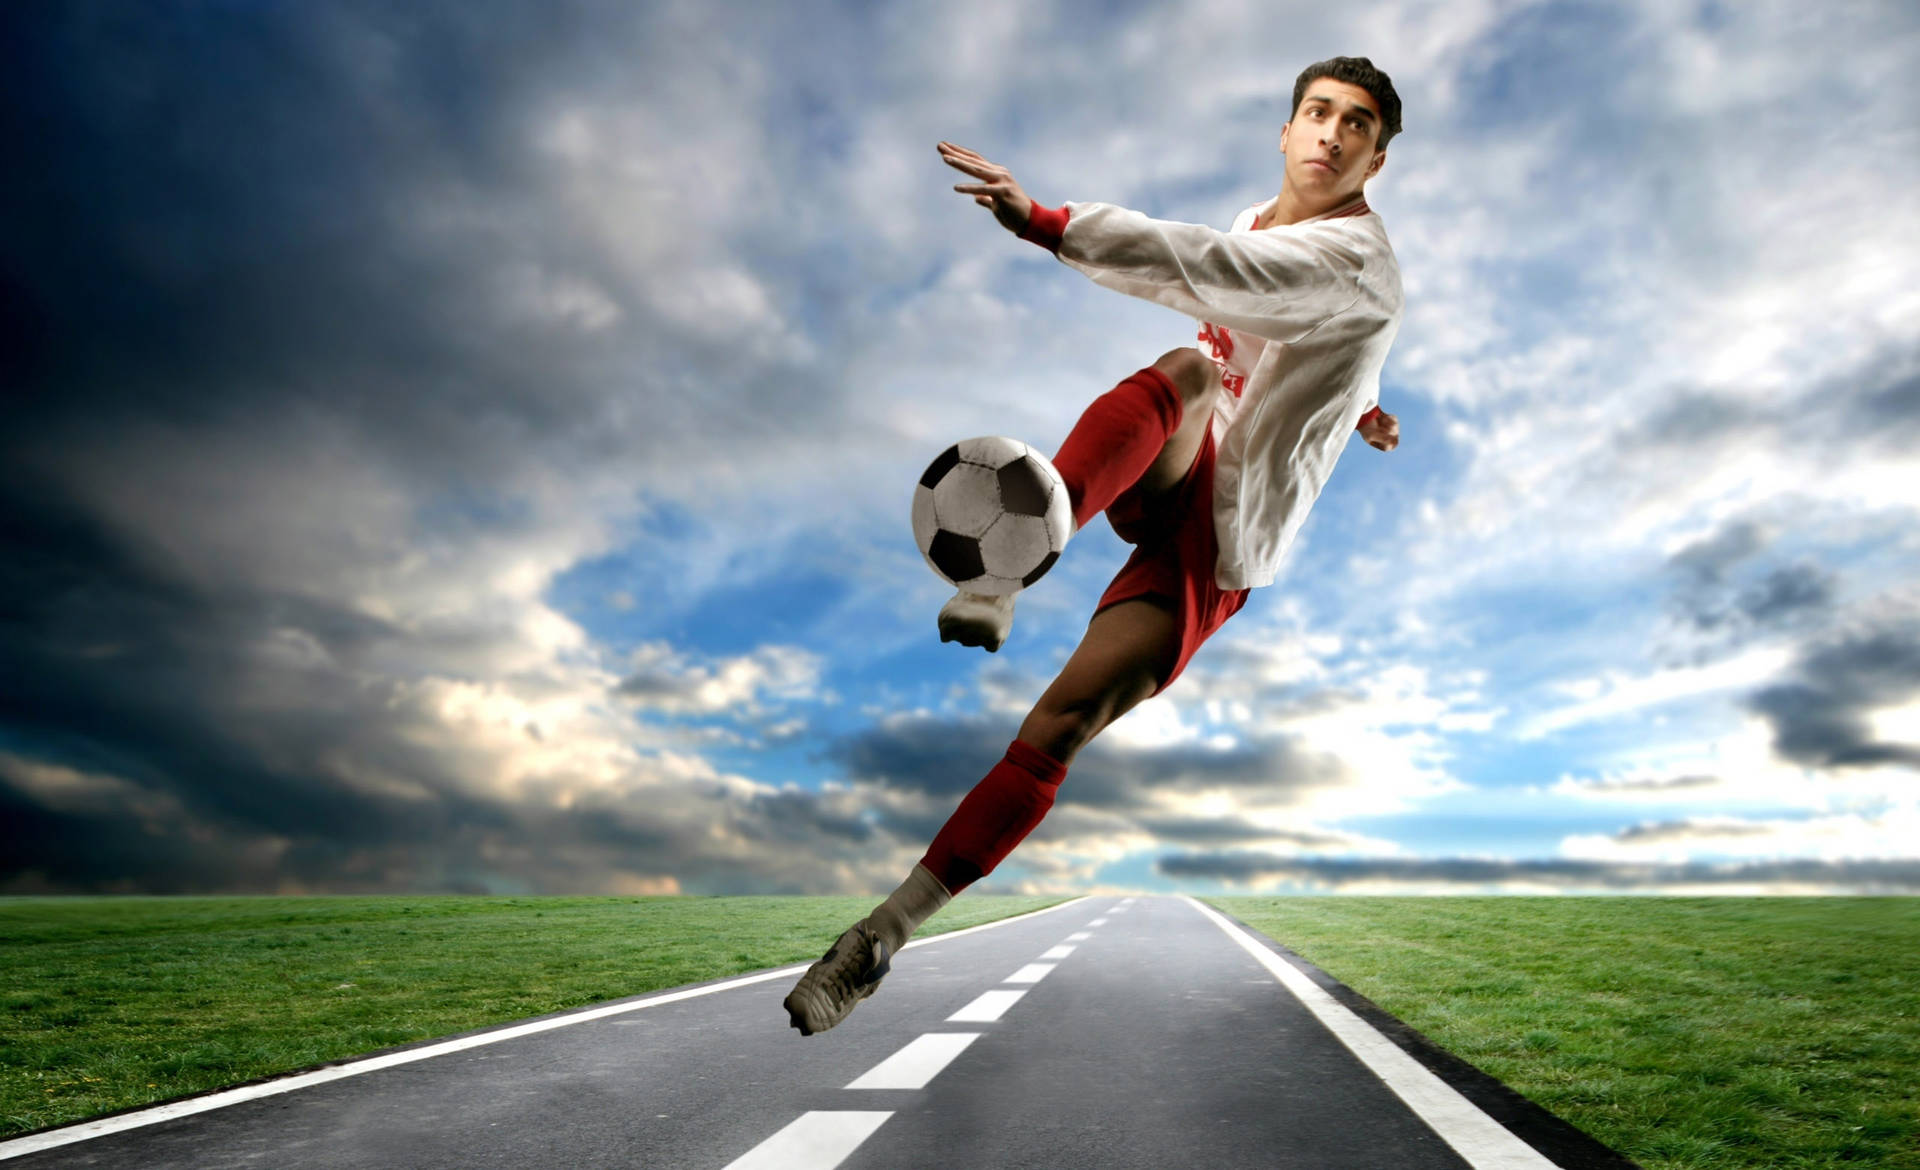 Cool Soccer Player Kick Pose Background